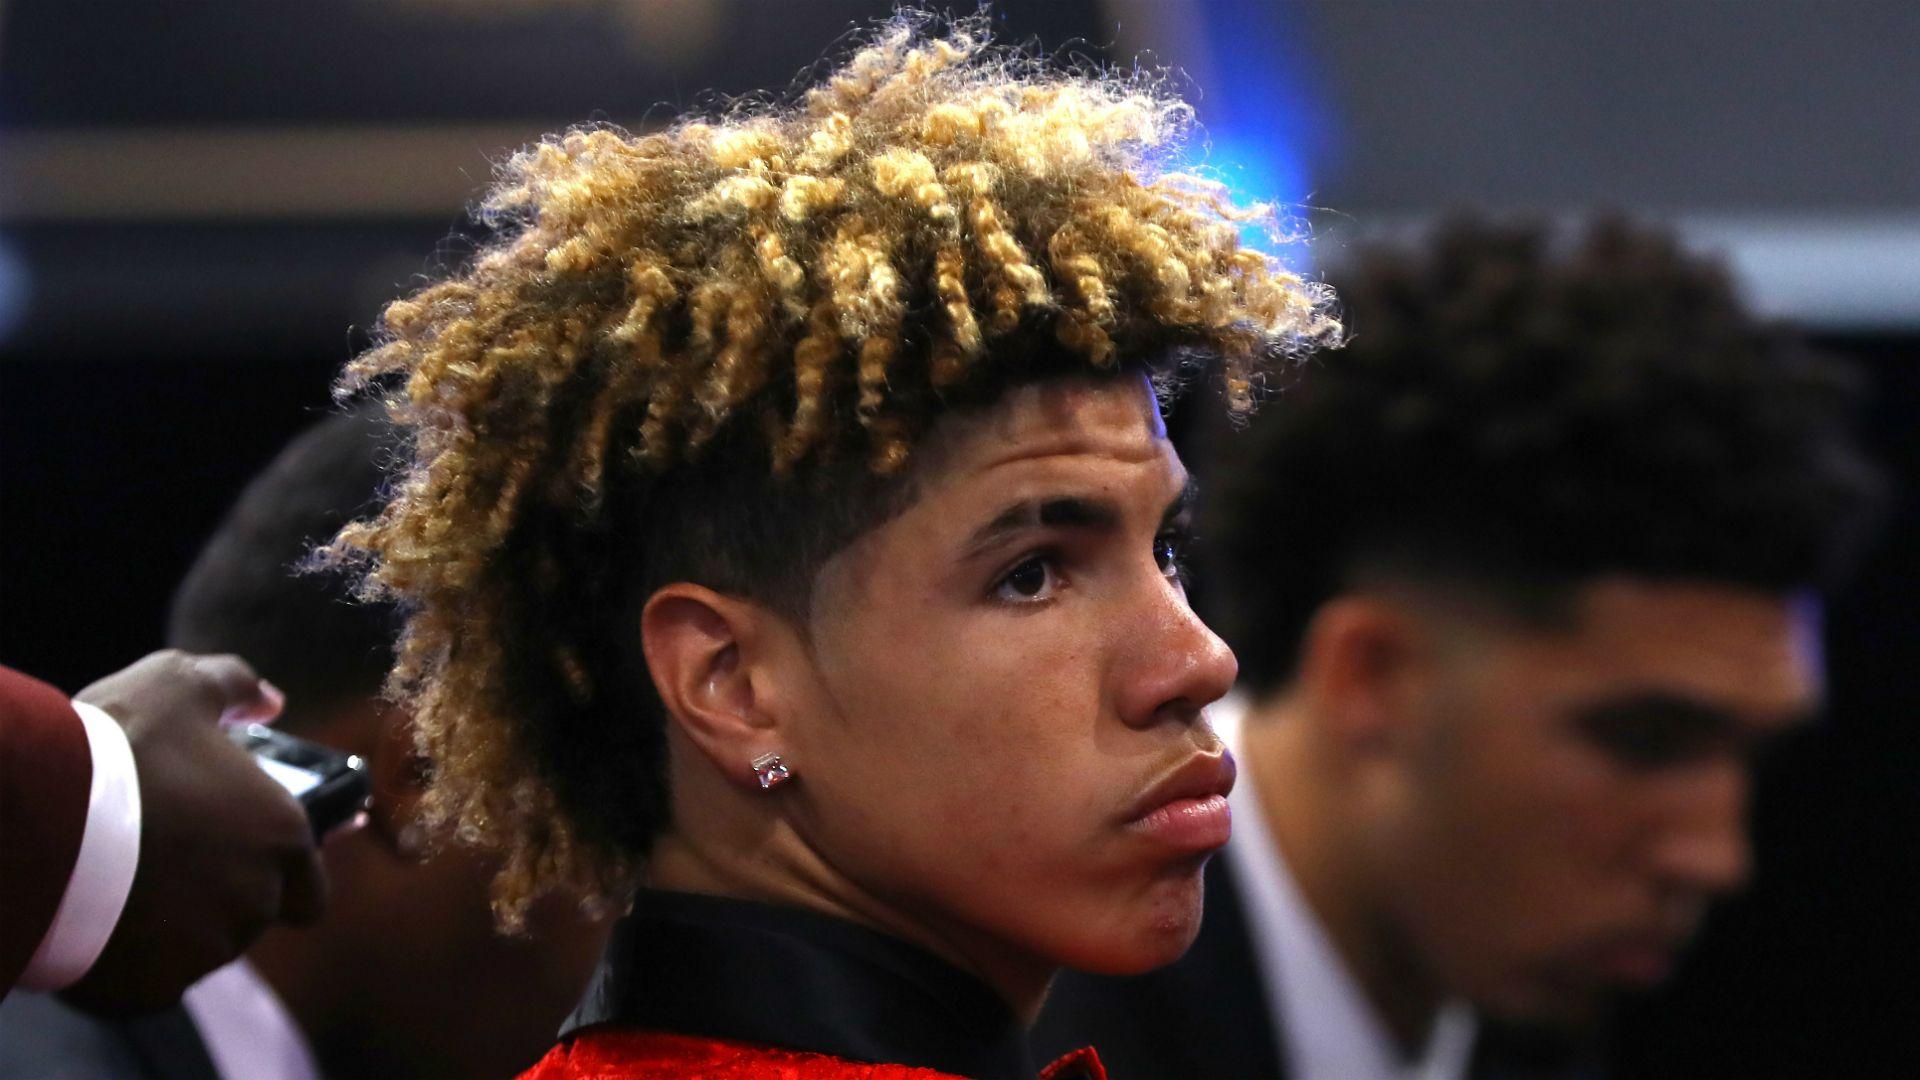 WWE issues statement after LaMelo Ball used 'inappropriate